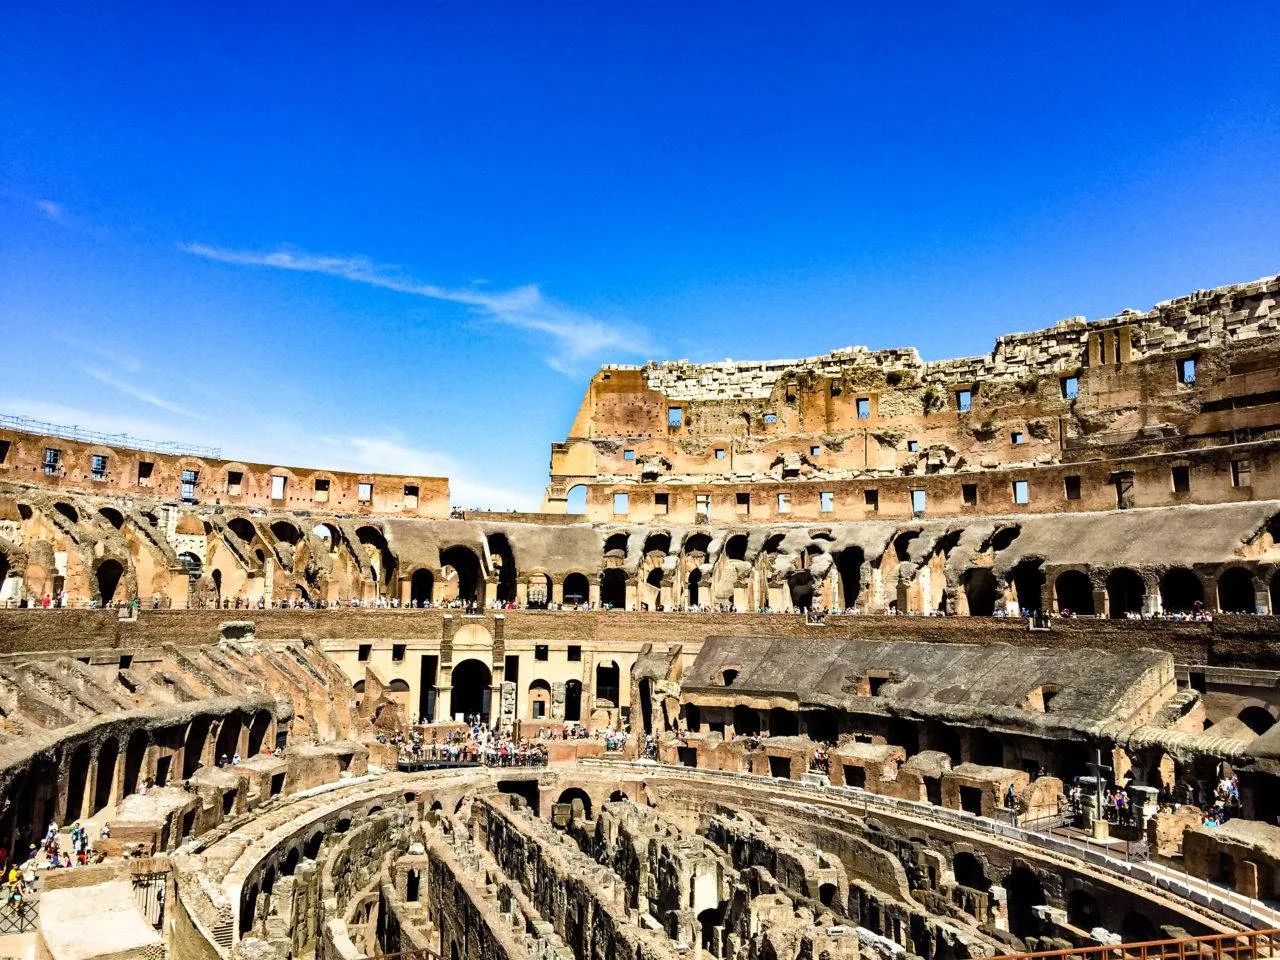 Planning a trip to Rome? Discover the tips and tricks for visiting Rome's most famous sights. This post outlines the Colosseum, The Forum, and Palatine Hill. #rome #visitingrome #palatinehill #romanforum #colosseum #visitingthecolosseum #romancolosseum #ancientrome #romeitinerary